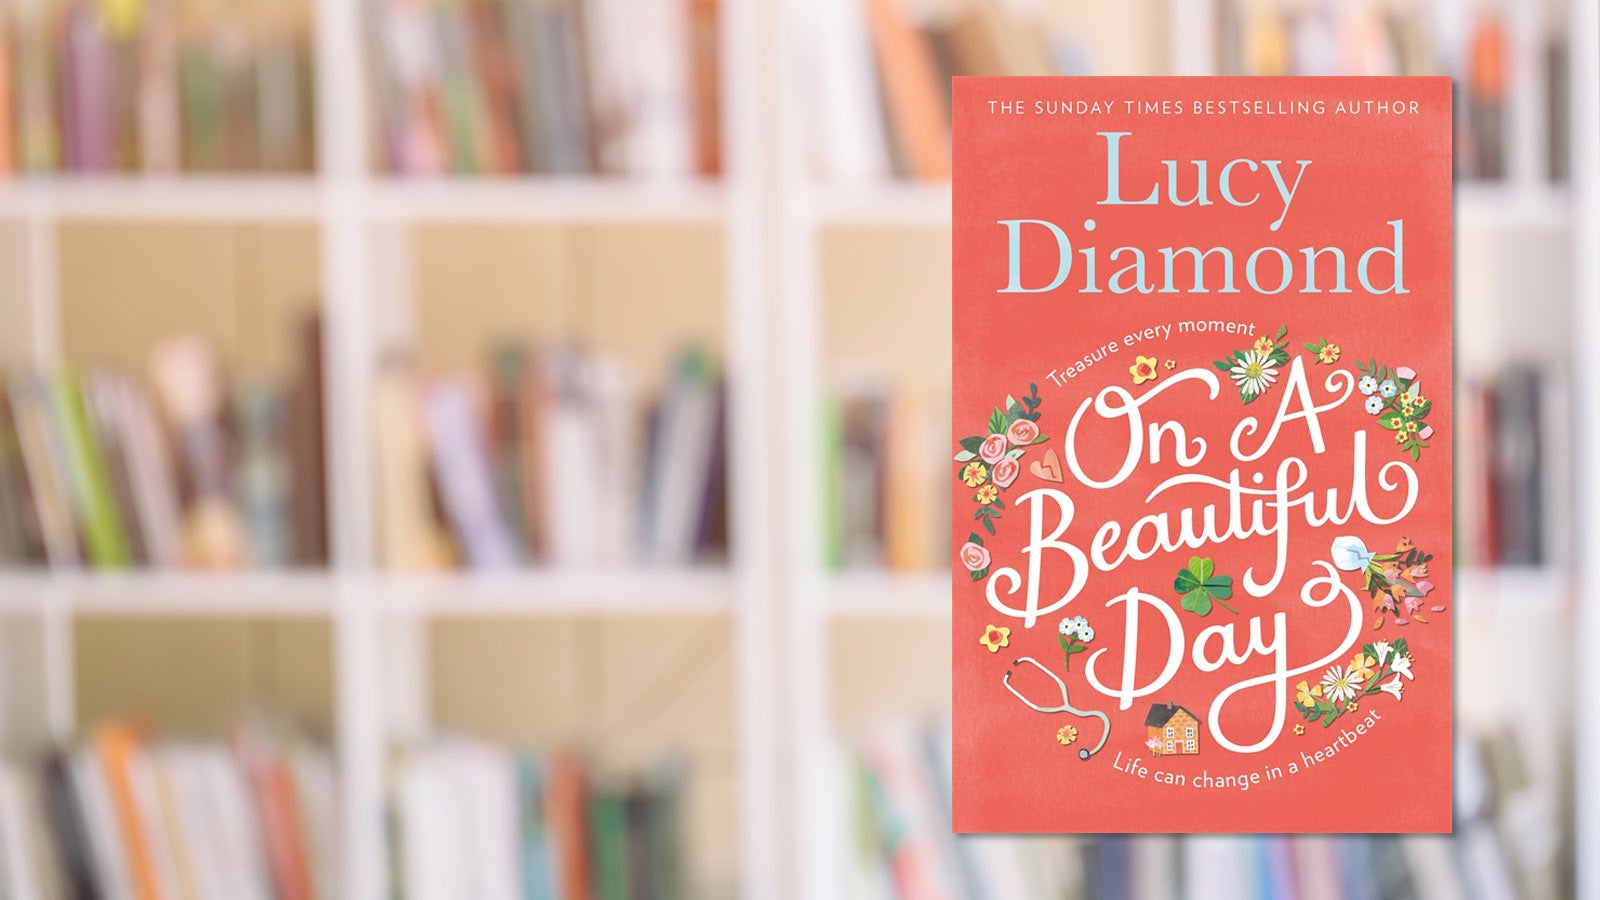 Lucy Diamond's On A Beautiful Day against a backdrop of a bookshelf.